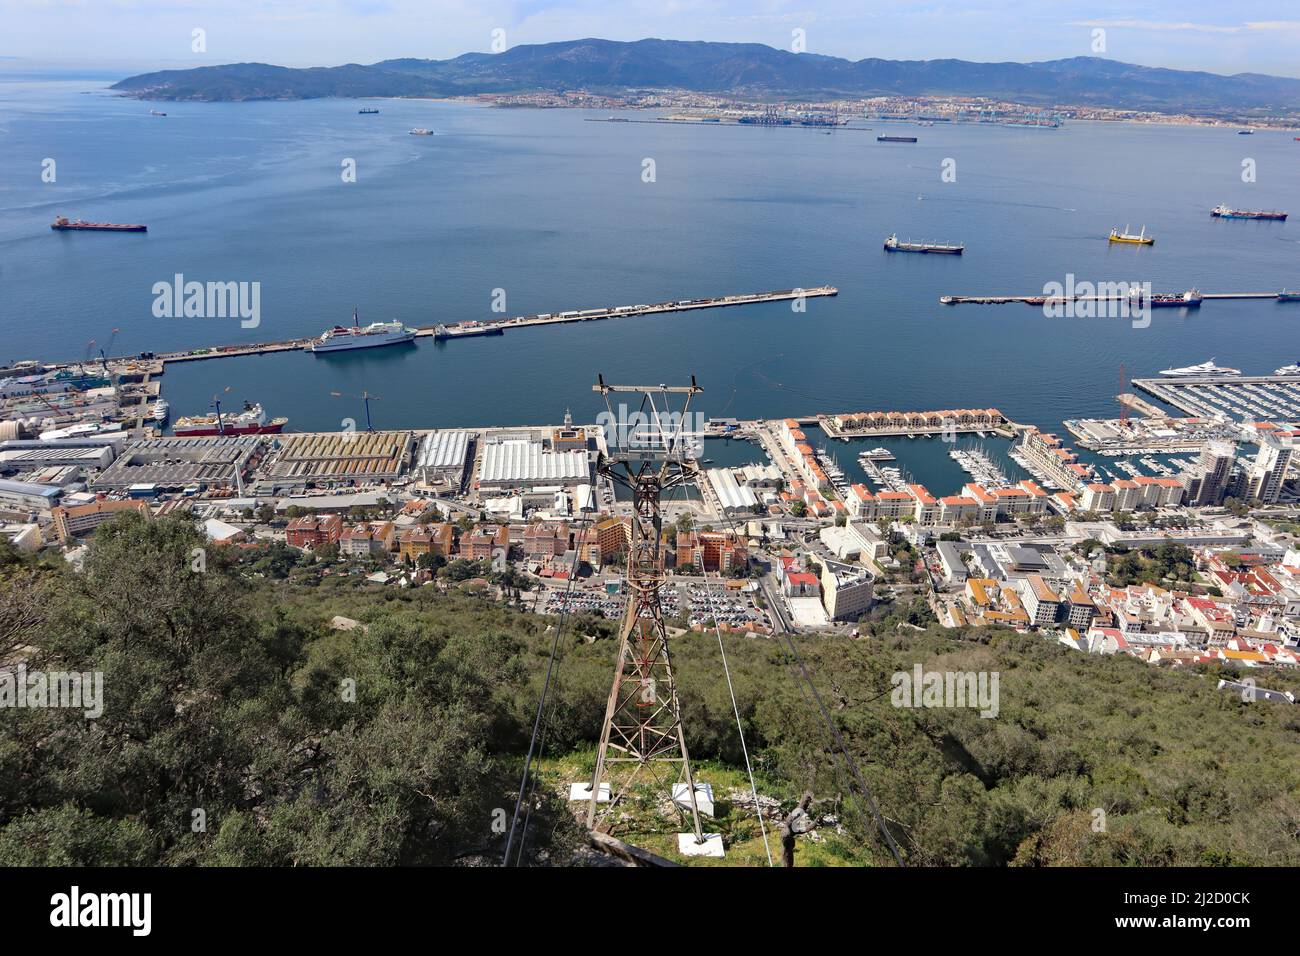 Panoramic view over Gibraltar harbour from the top of the Rock of Gibraltar. The airport runway juts out into the water. Stock Photo